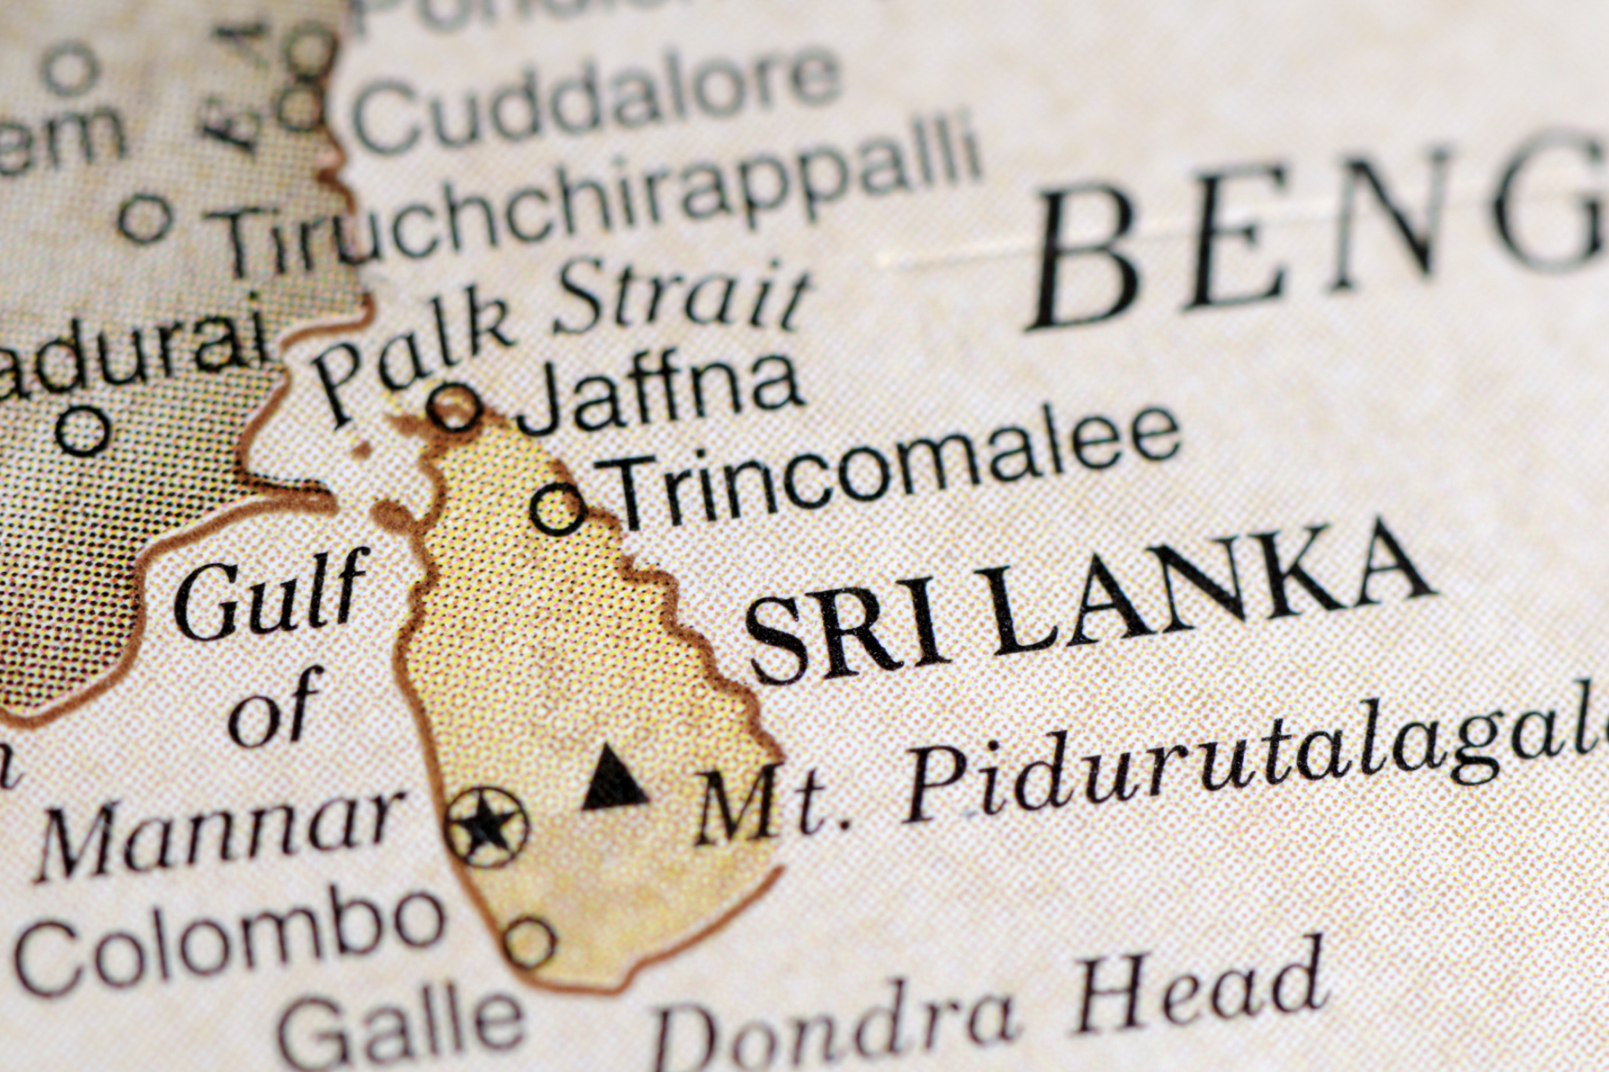 New document on analysis of out-of-pocket expenditure in rural Sri Lanka is now available